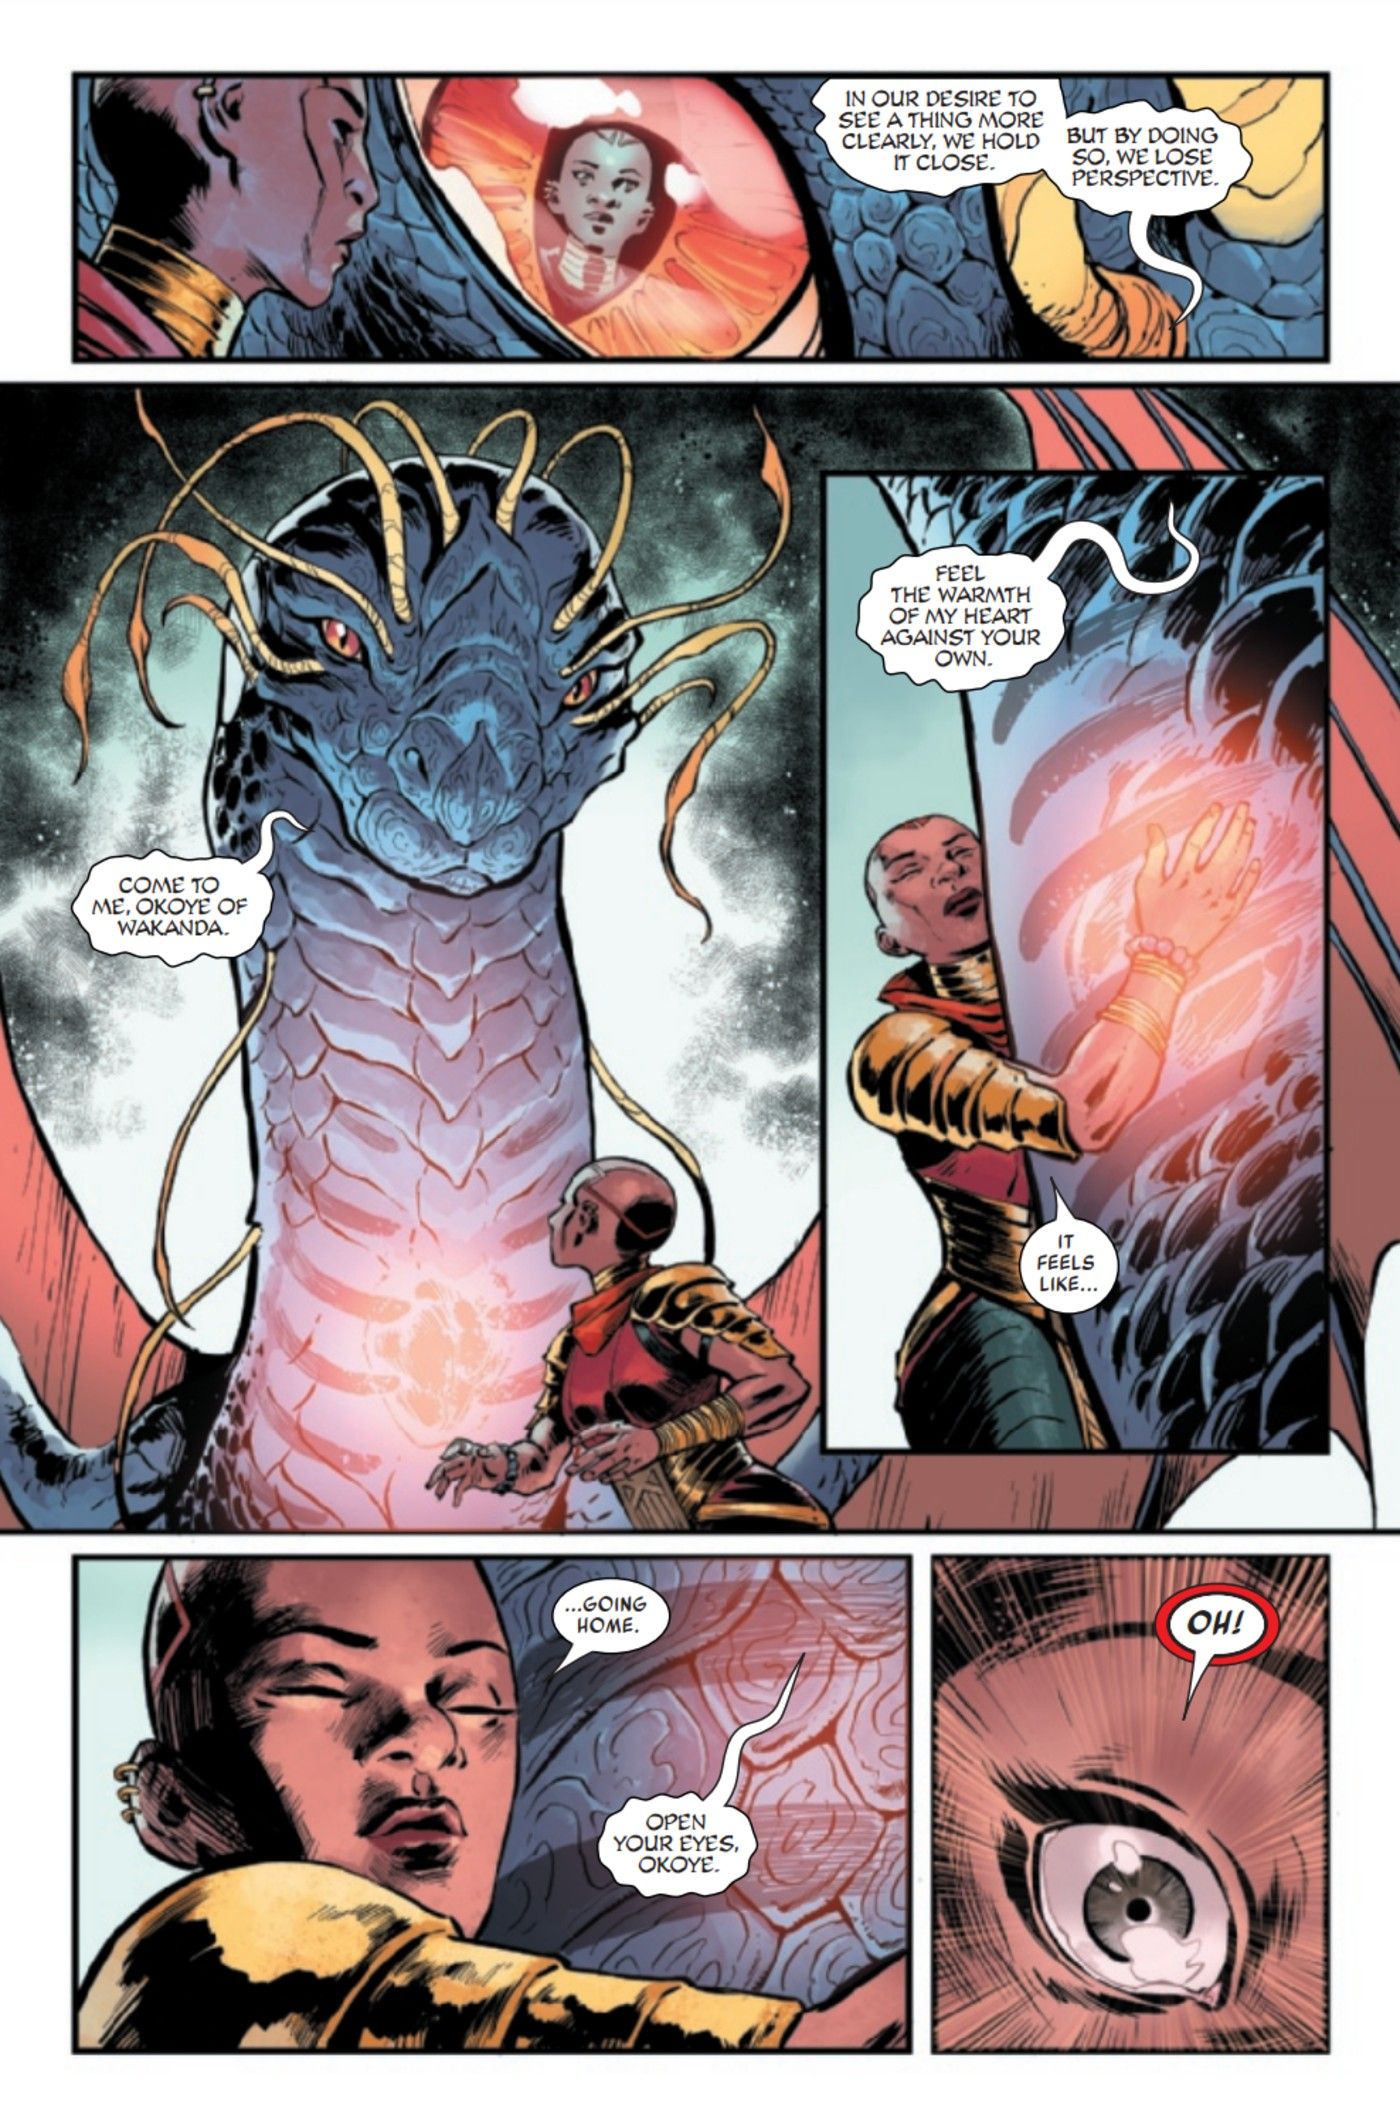 Iron Fist Heart of the Dragon 4 preview page 3 tldr vertical